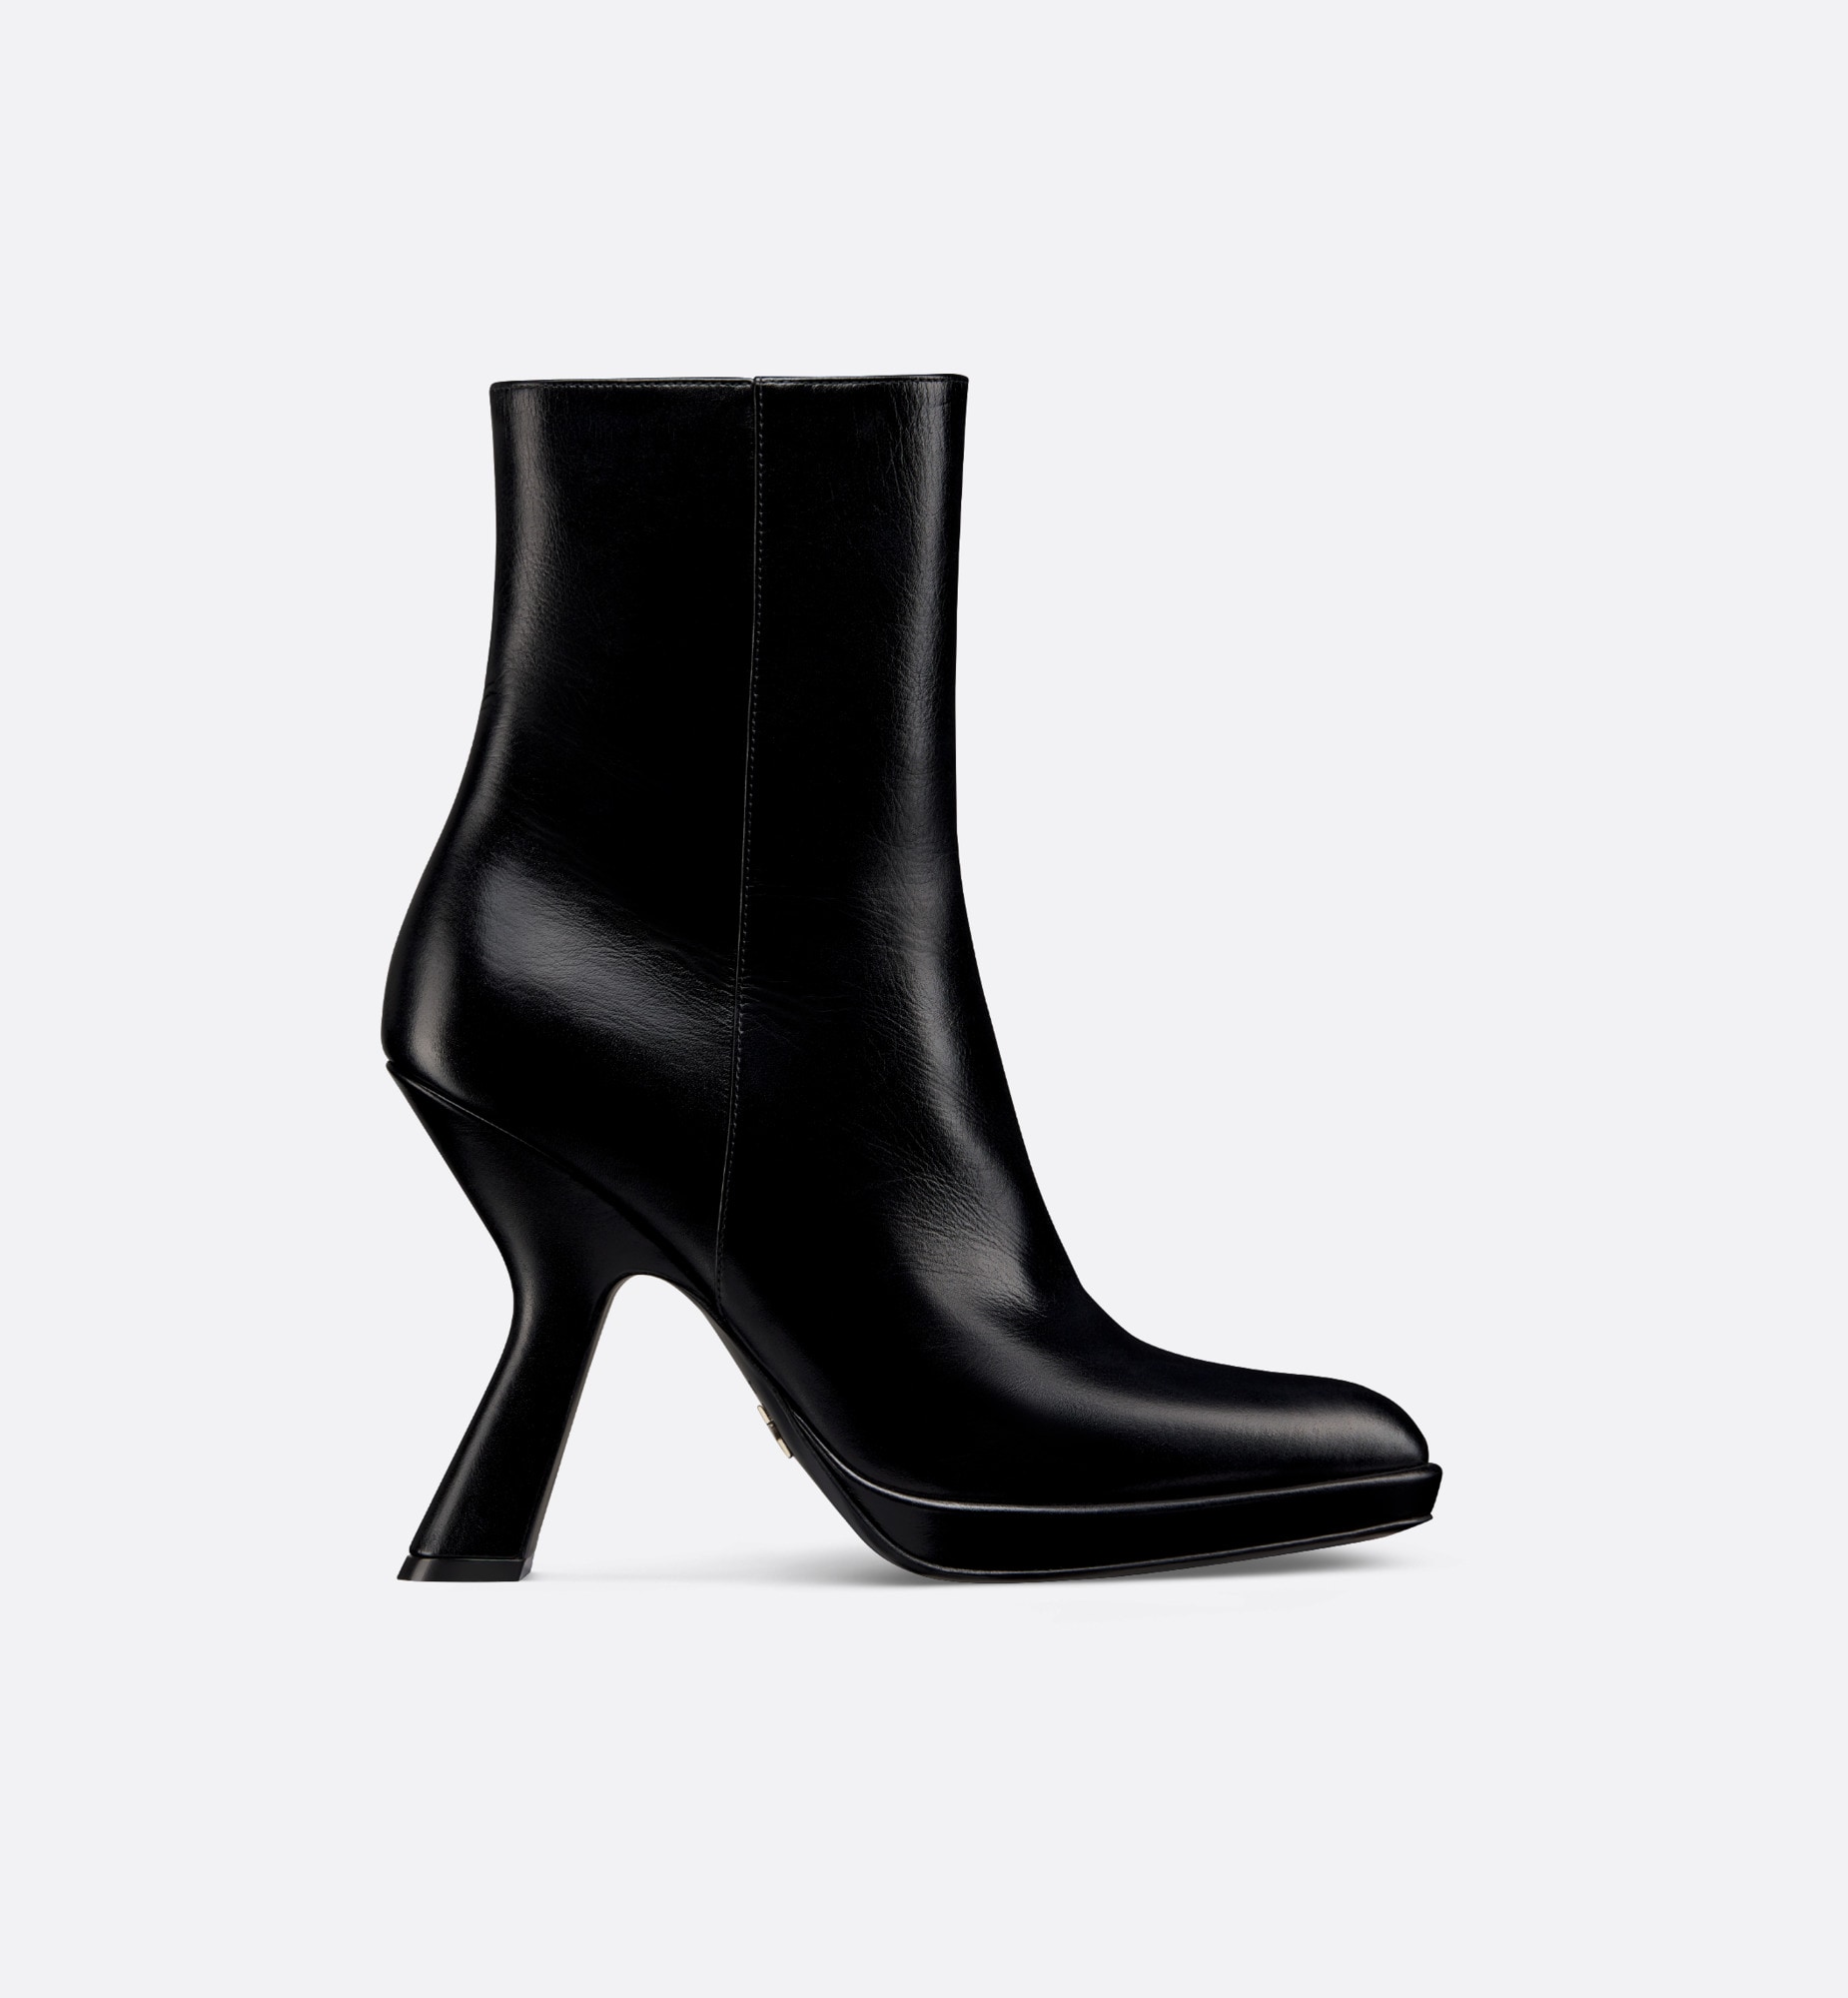 D-fiction heeled christian dior ankle boots